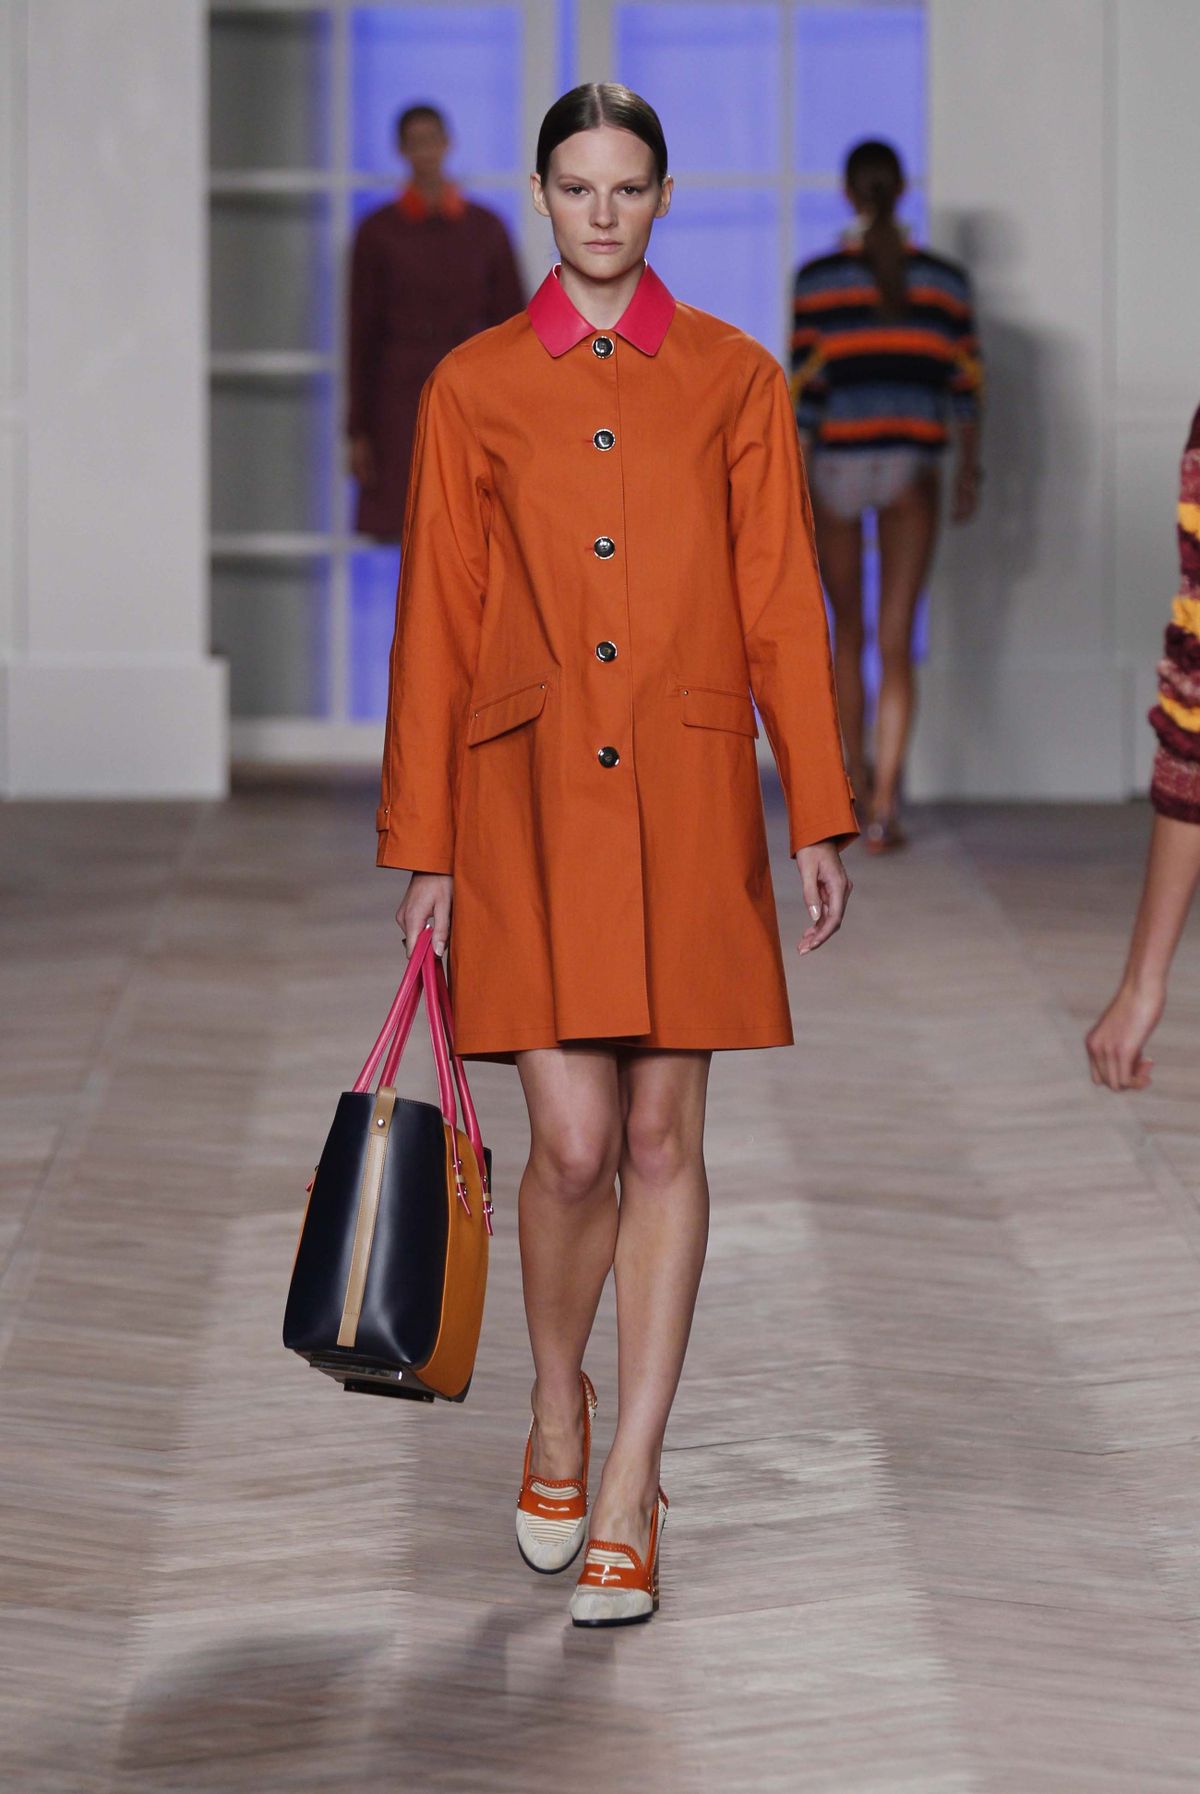 A model wearing a design from the Tommy Hilfiger Spring 2012 women’s collection strolls the catwalk during Fashion Week in New York in September. Pantone has chosen a reddish-orange hue as their top color of the year for 2012. (Associated Press)